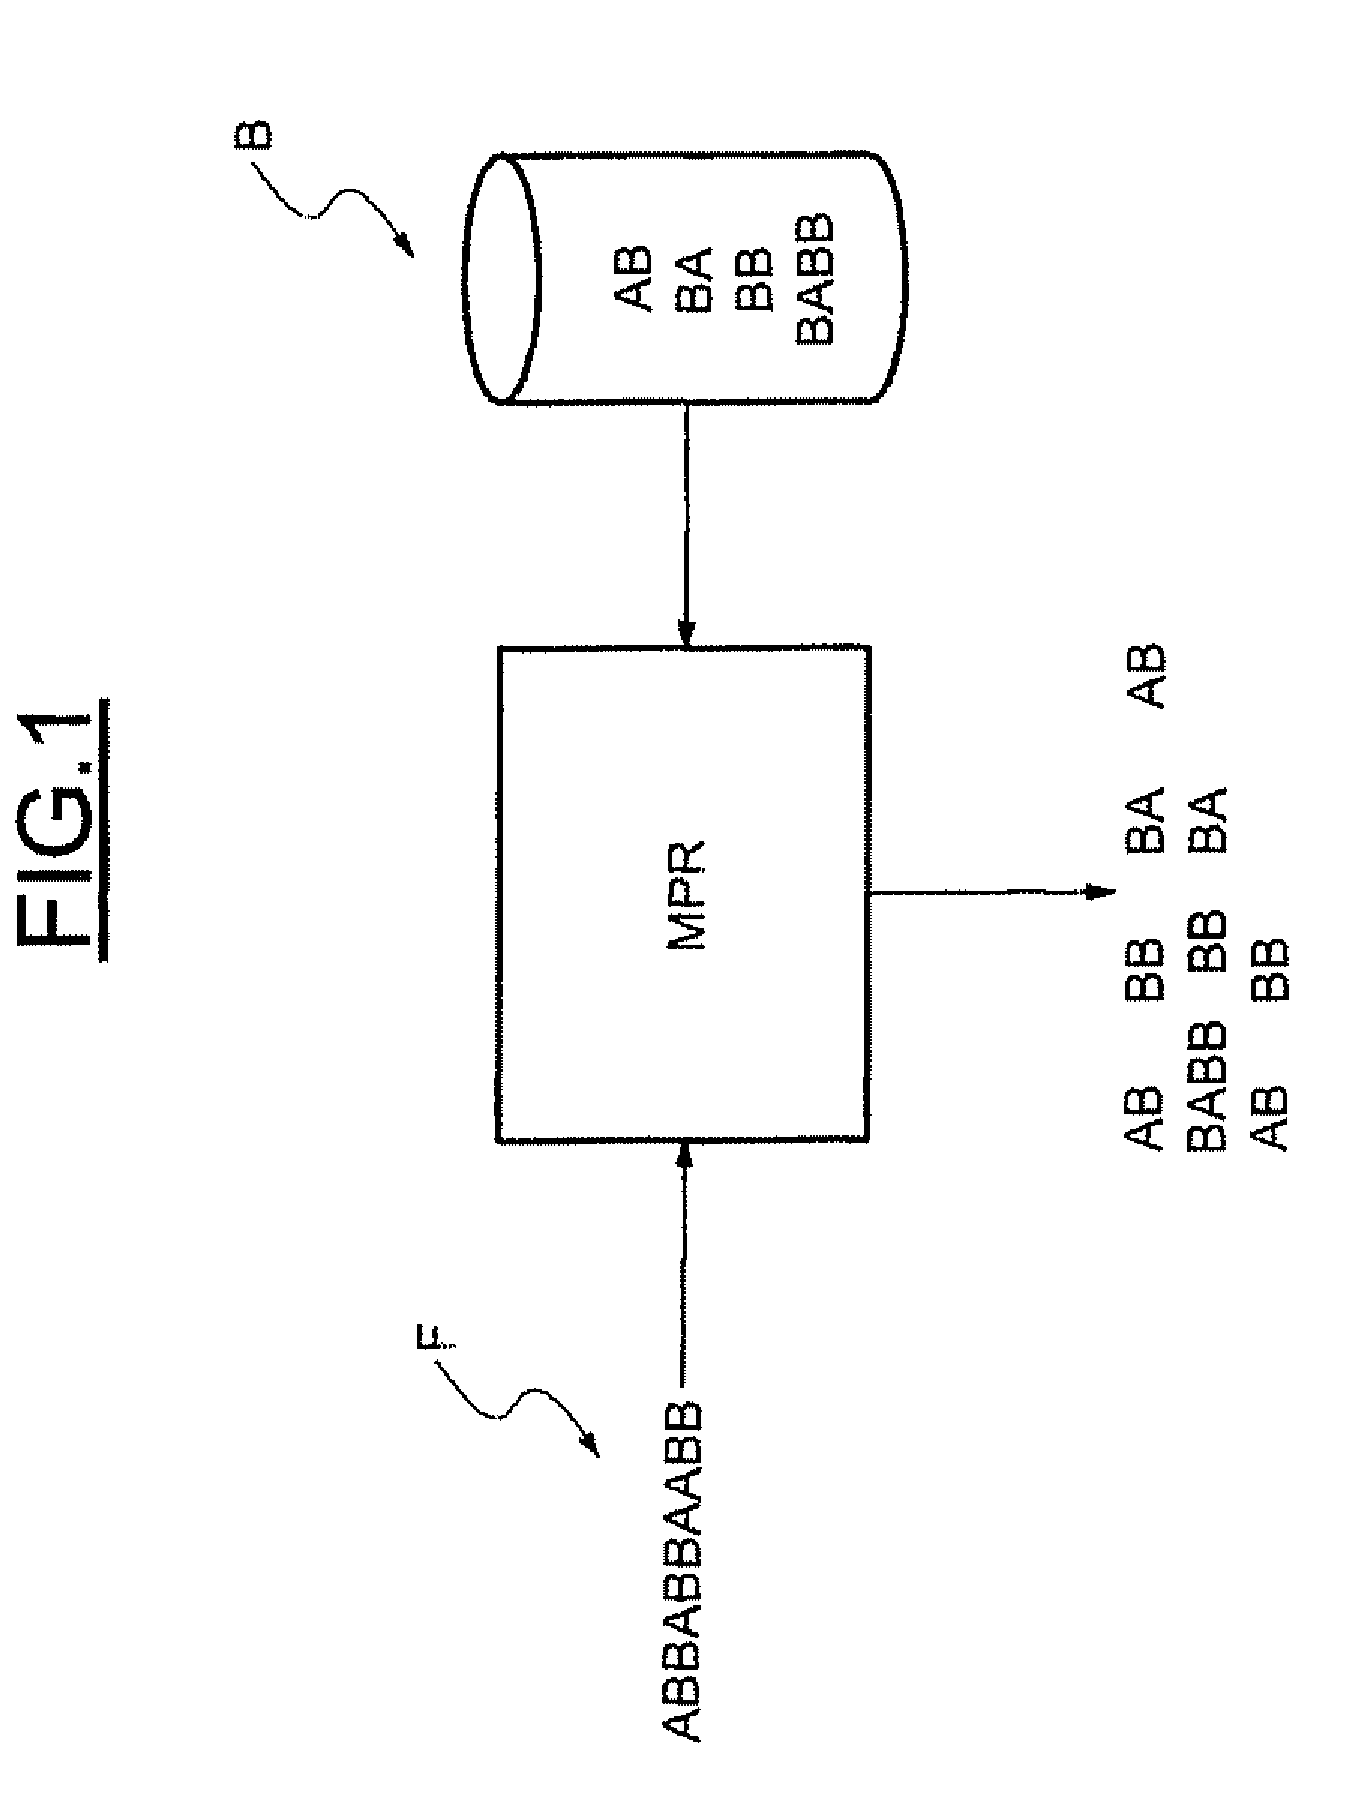 Memory circuit for aho-corasick type character recognition automaton and method of storing data in such a circuit